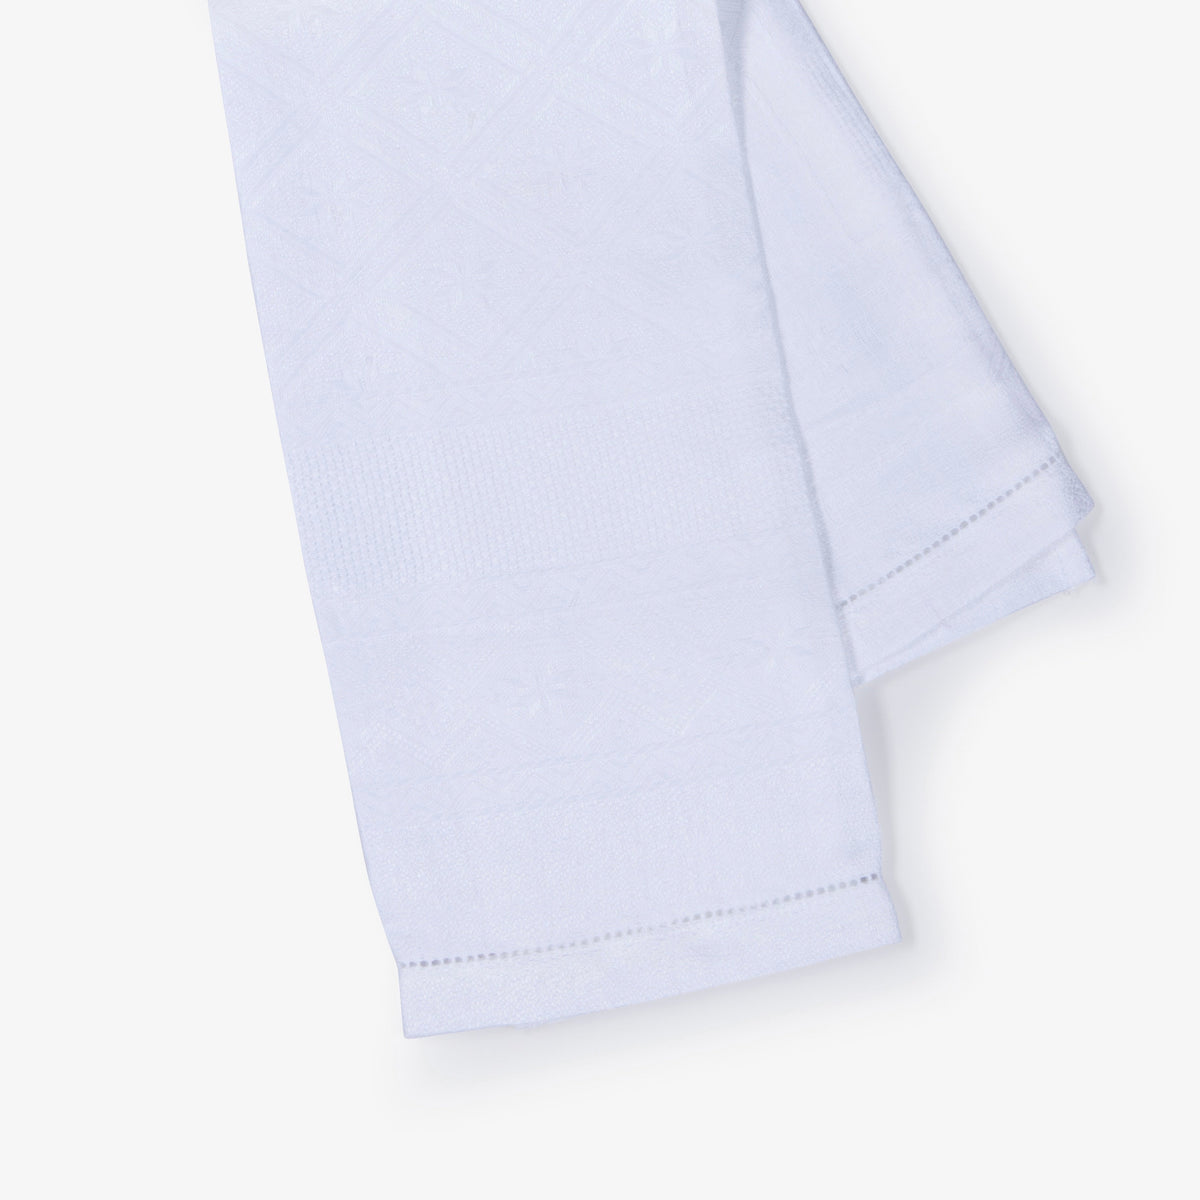 Adelaide Italian Linen Hand Towel - The Finishing Store South Africa